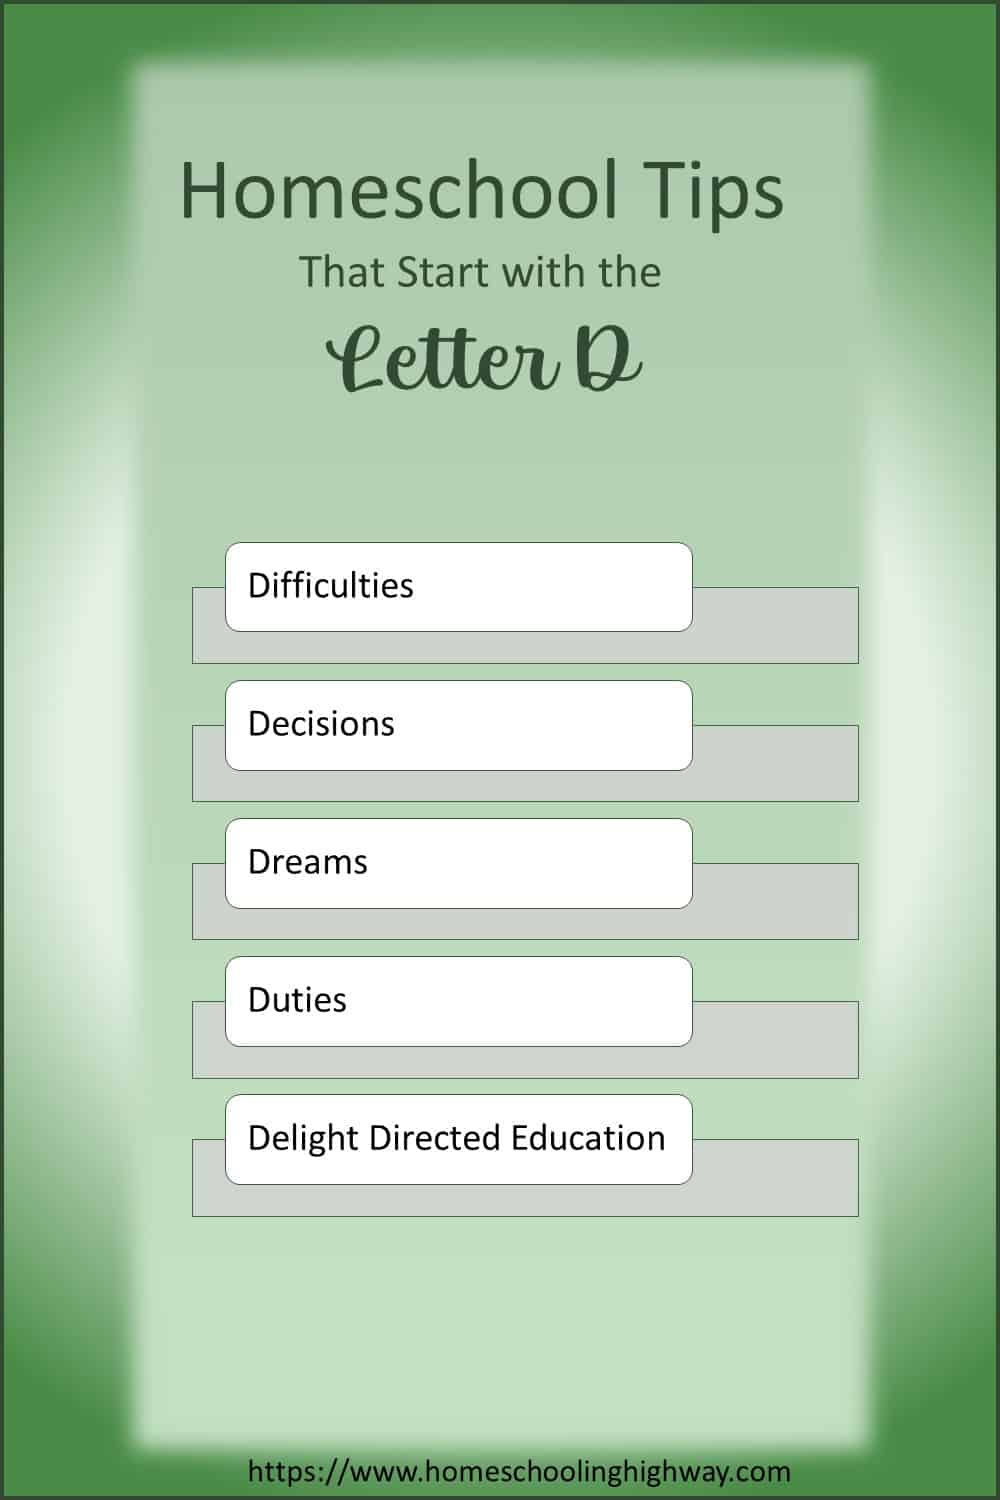 Homeschooling Tips That Start With D. Difficulties, Decisions, Dreams, Delight Directed Education